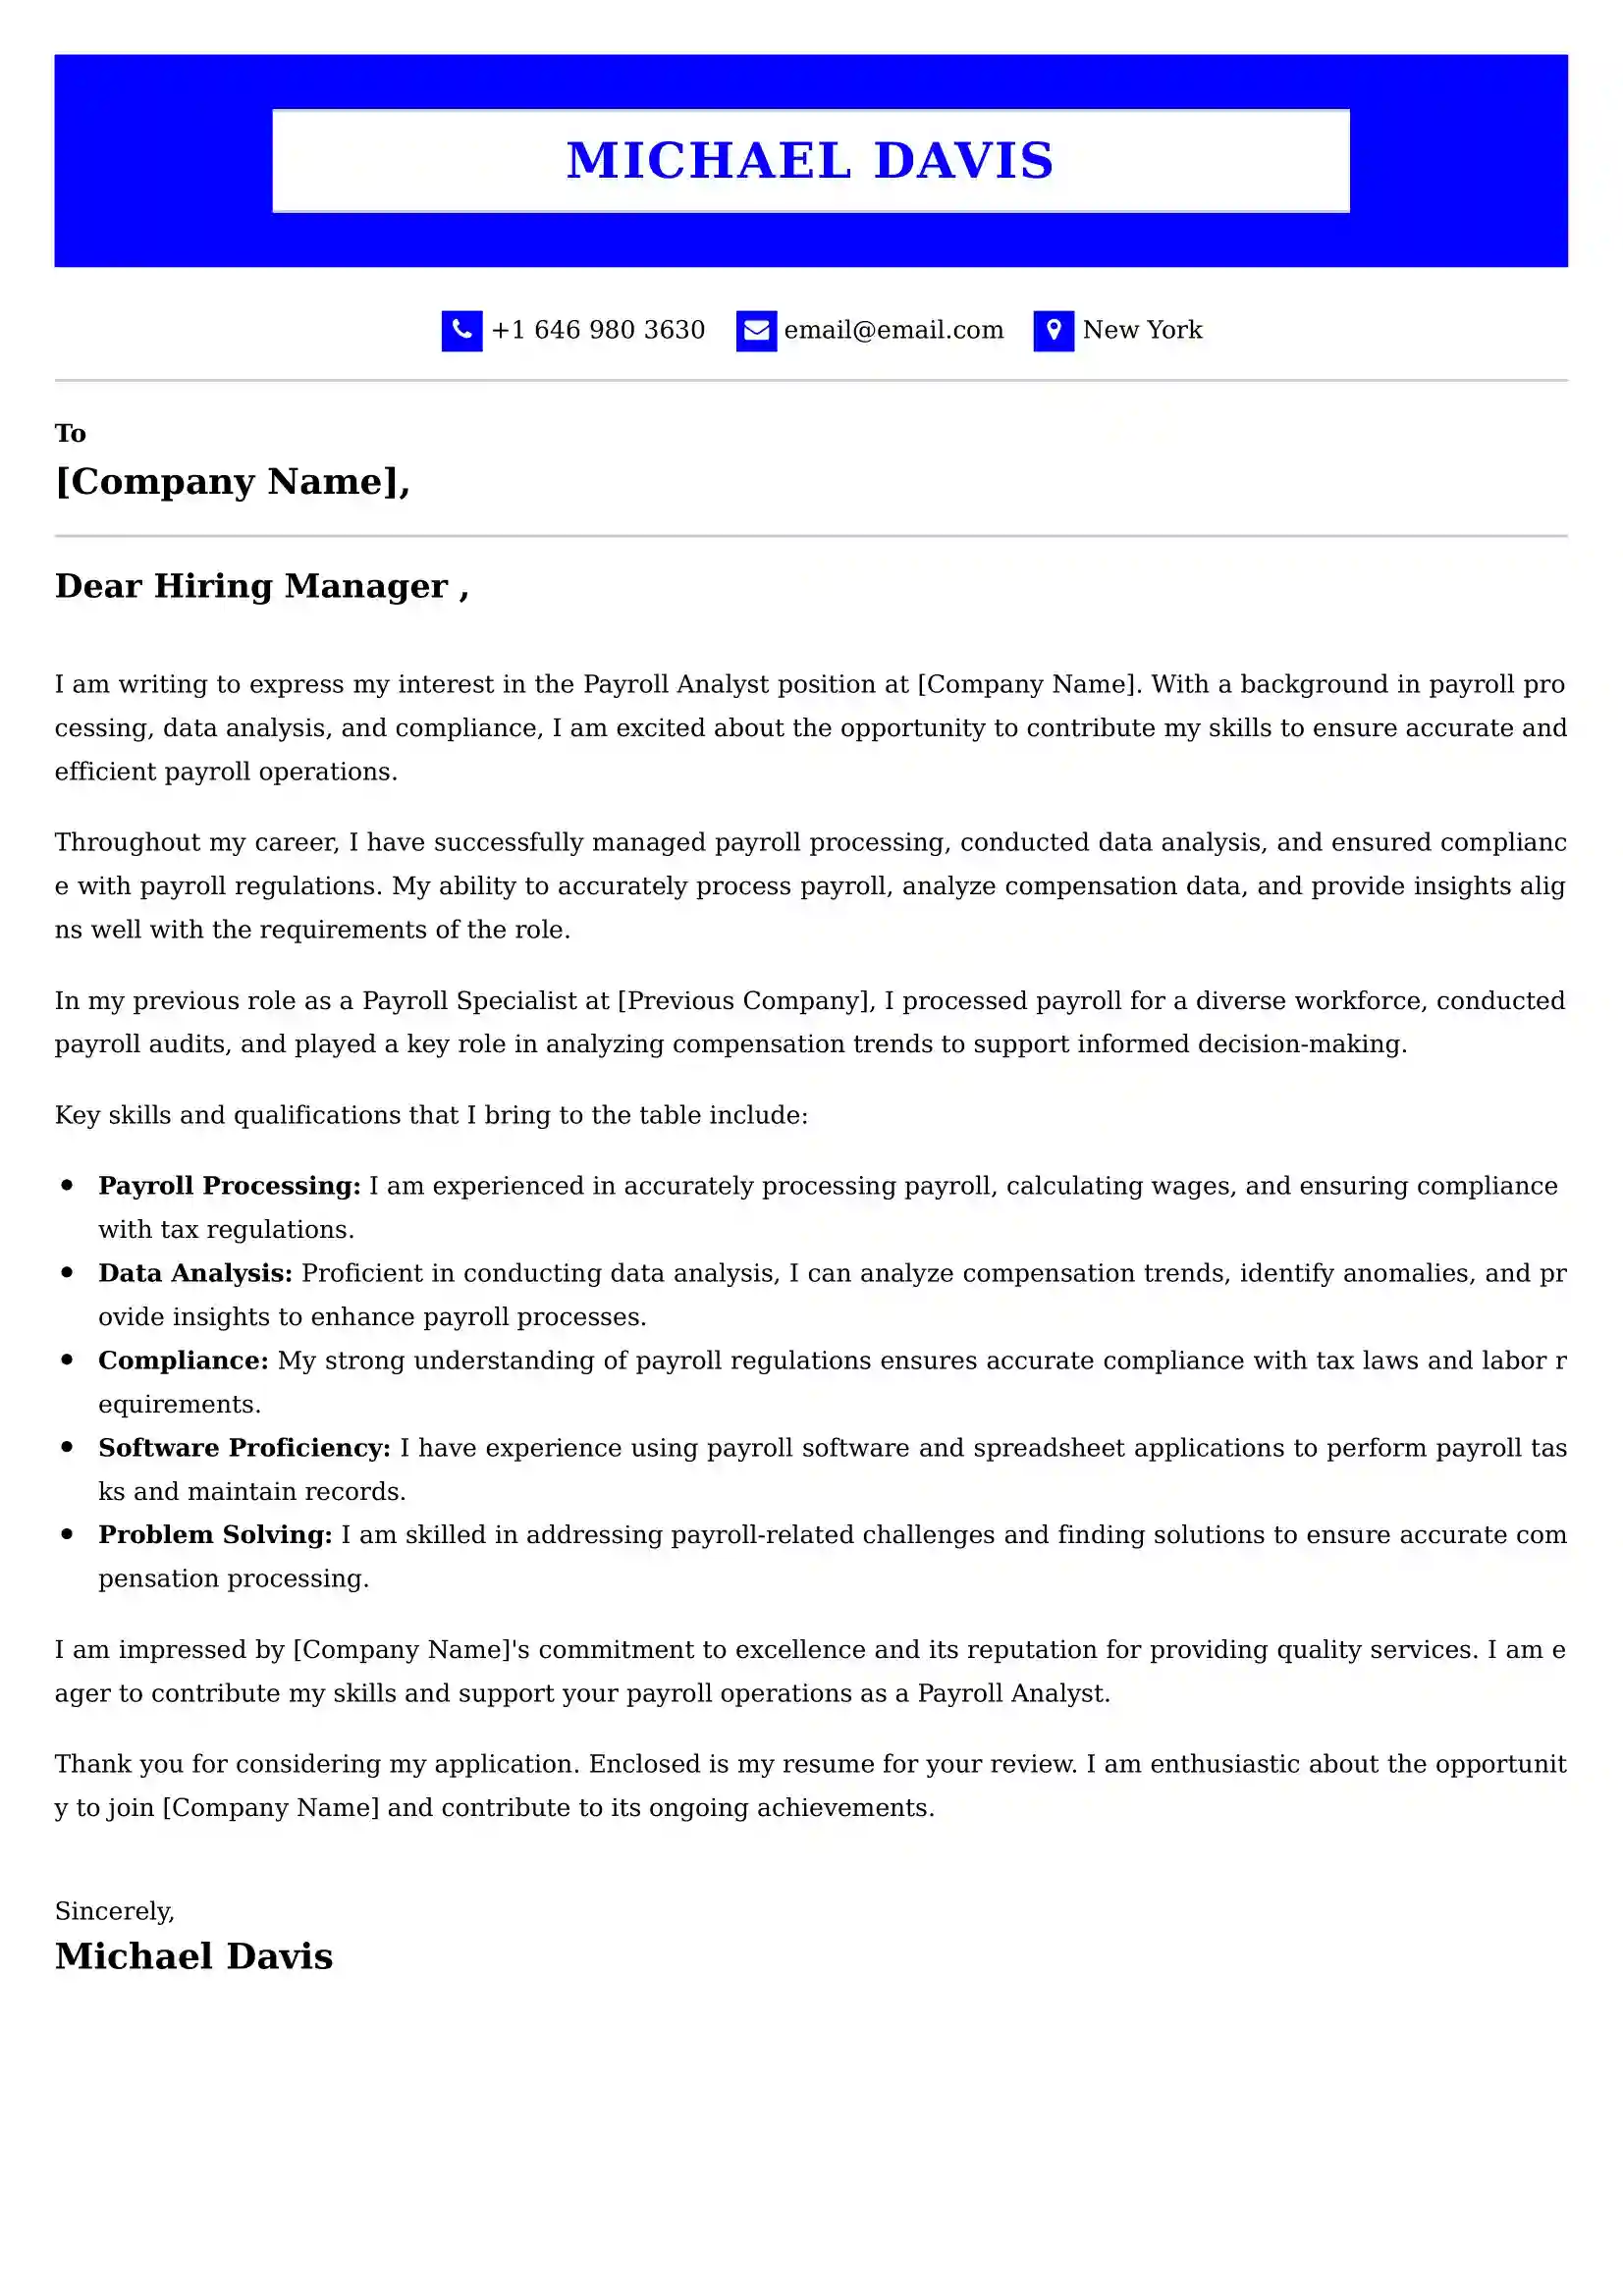 Payroll Analyst Cover Letter Examples - Latest UK Format